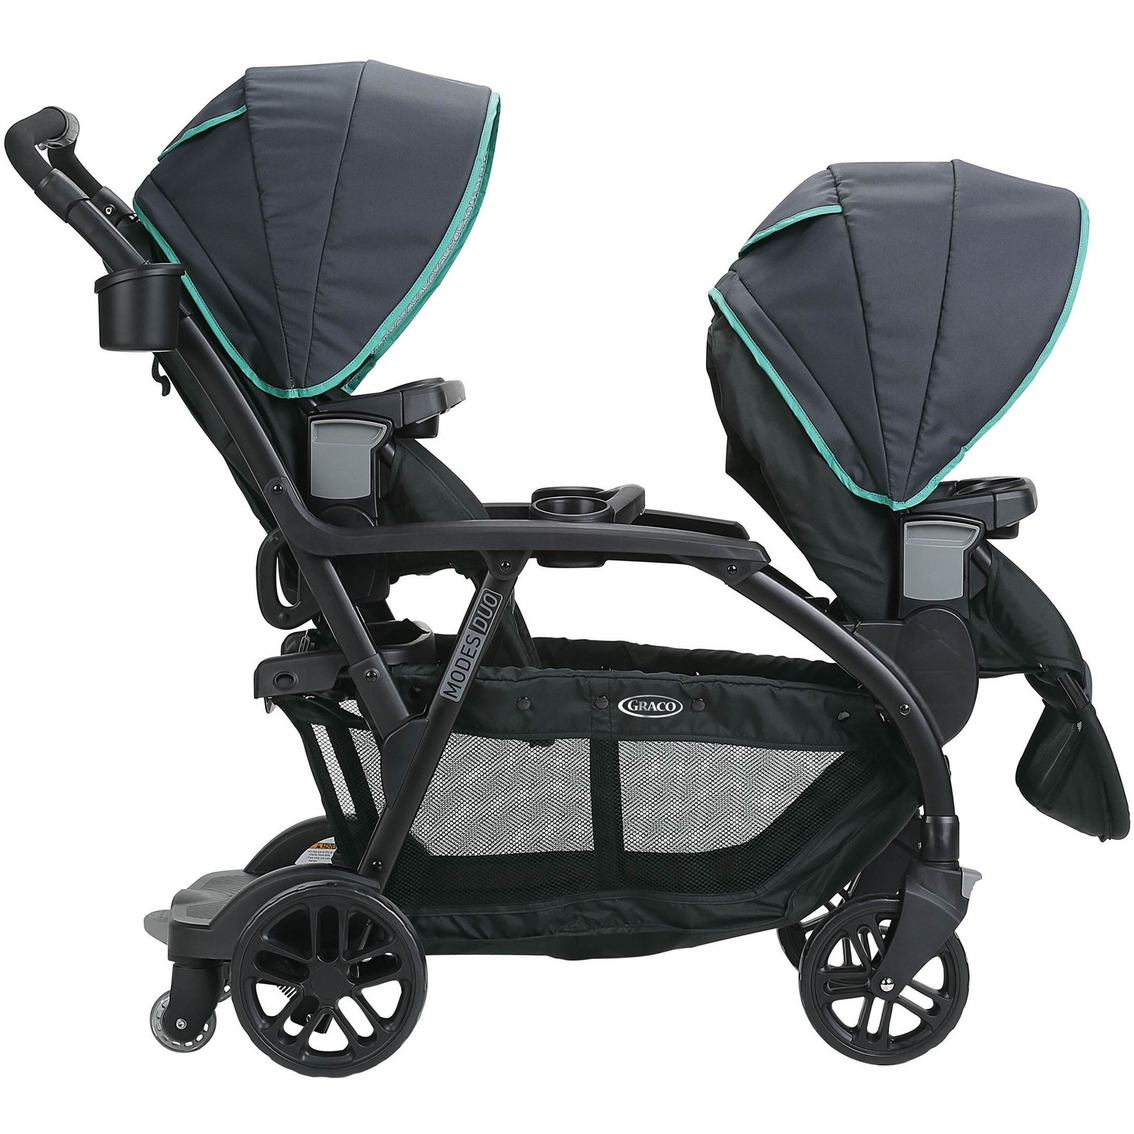 Graco Modes Duo Stroller - Image 2 of 4